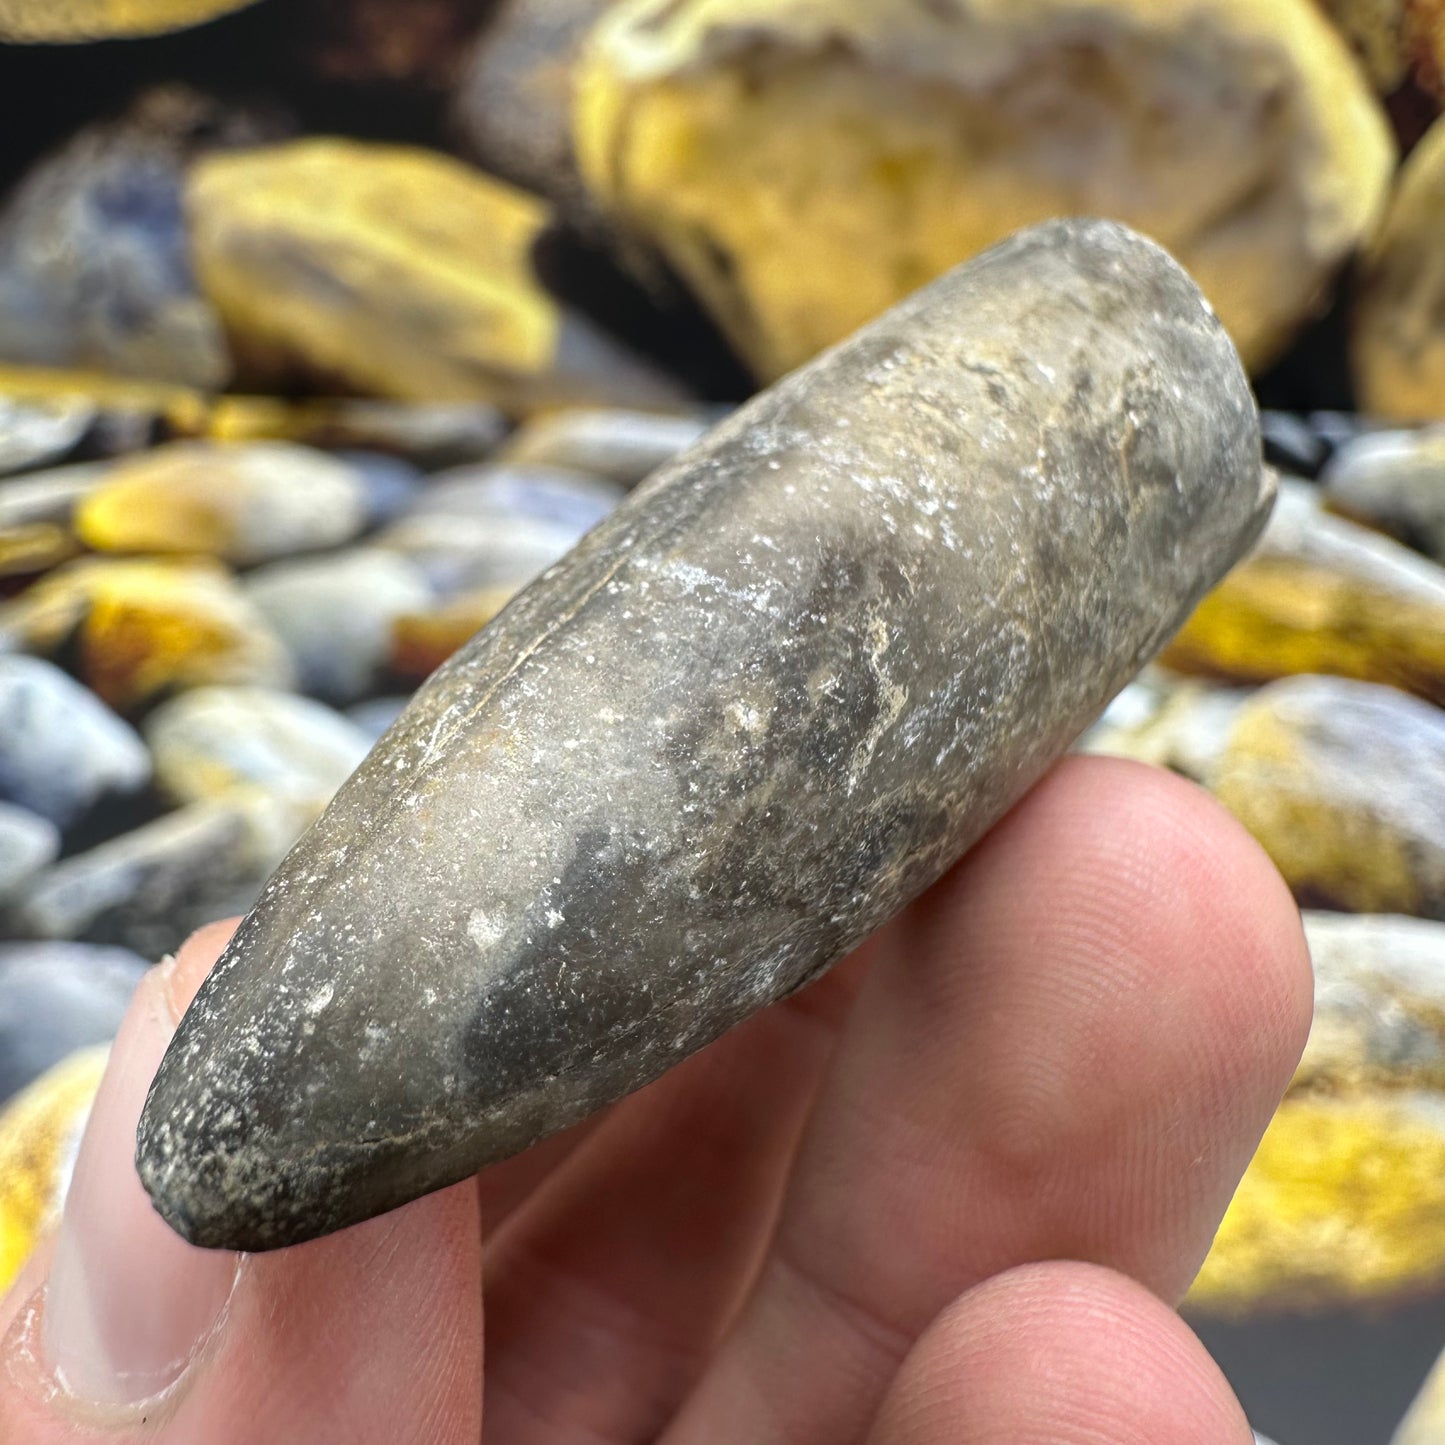 Belemnite (Fossil Squid) shell fossil - Whitby, North Yorkshire Jurassic Coast